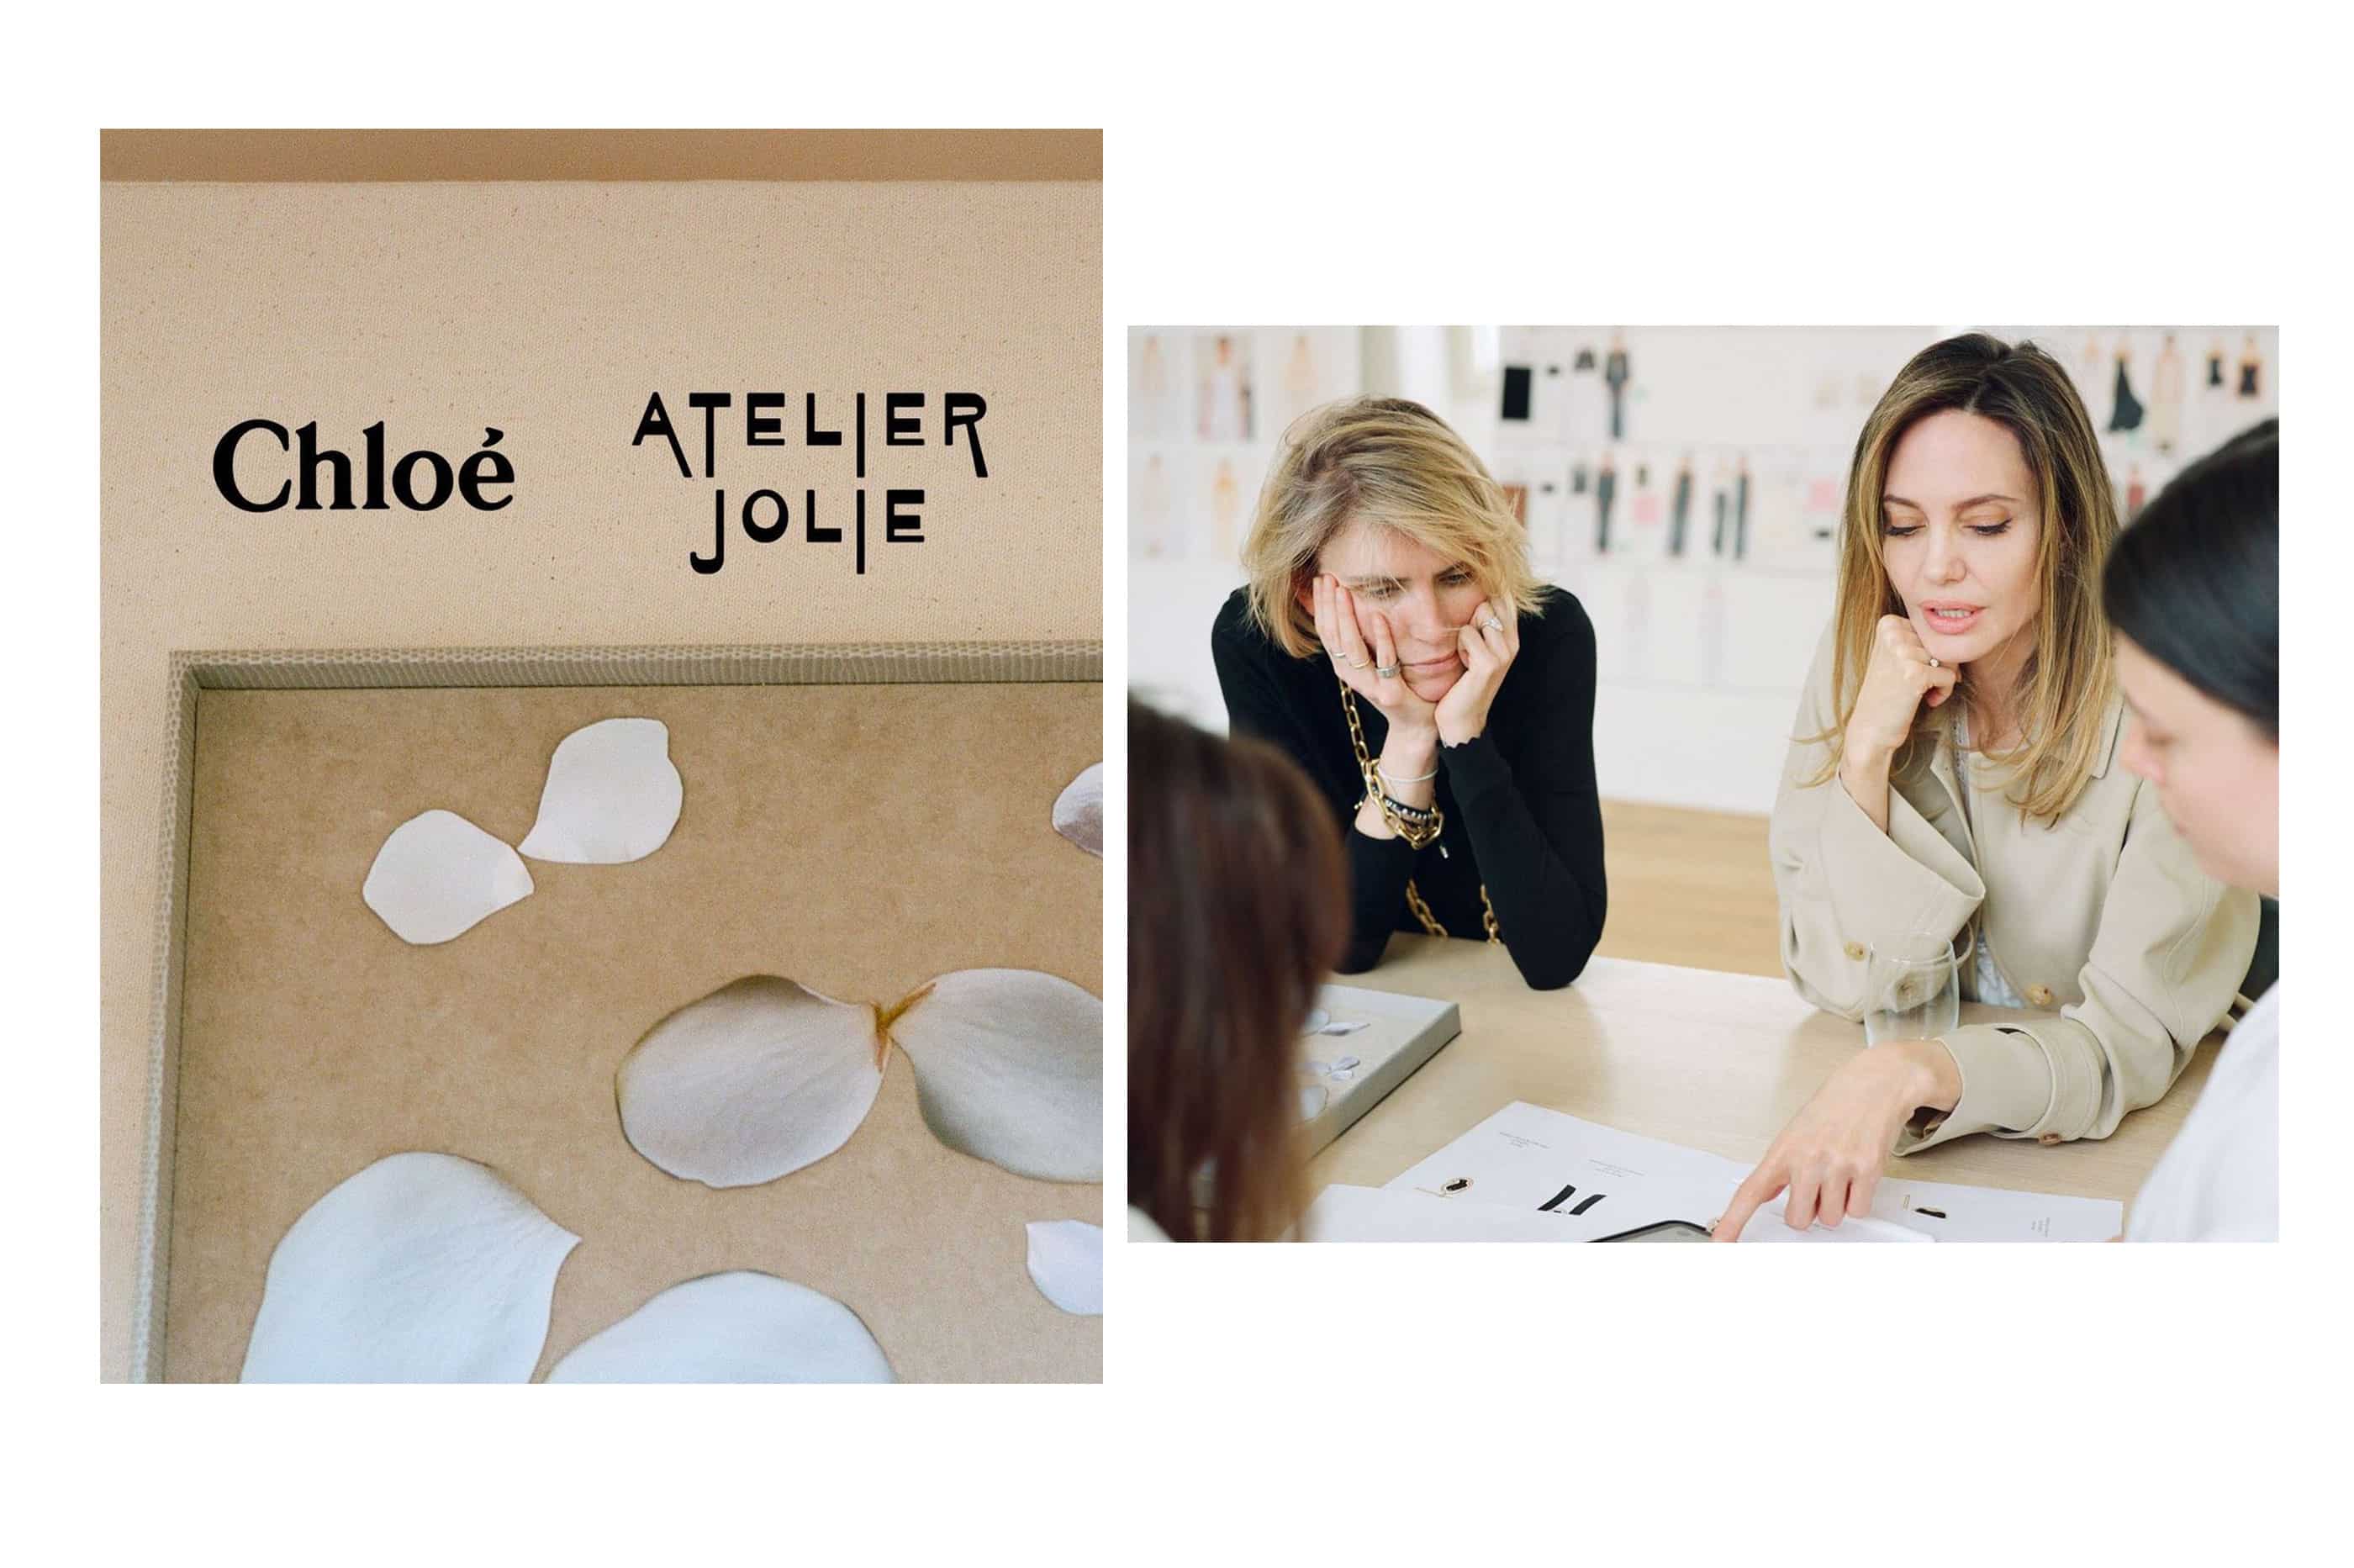 Angelina Jolie's atelier is doing a capsule collection with Chloé